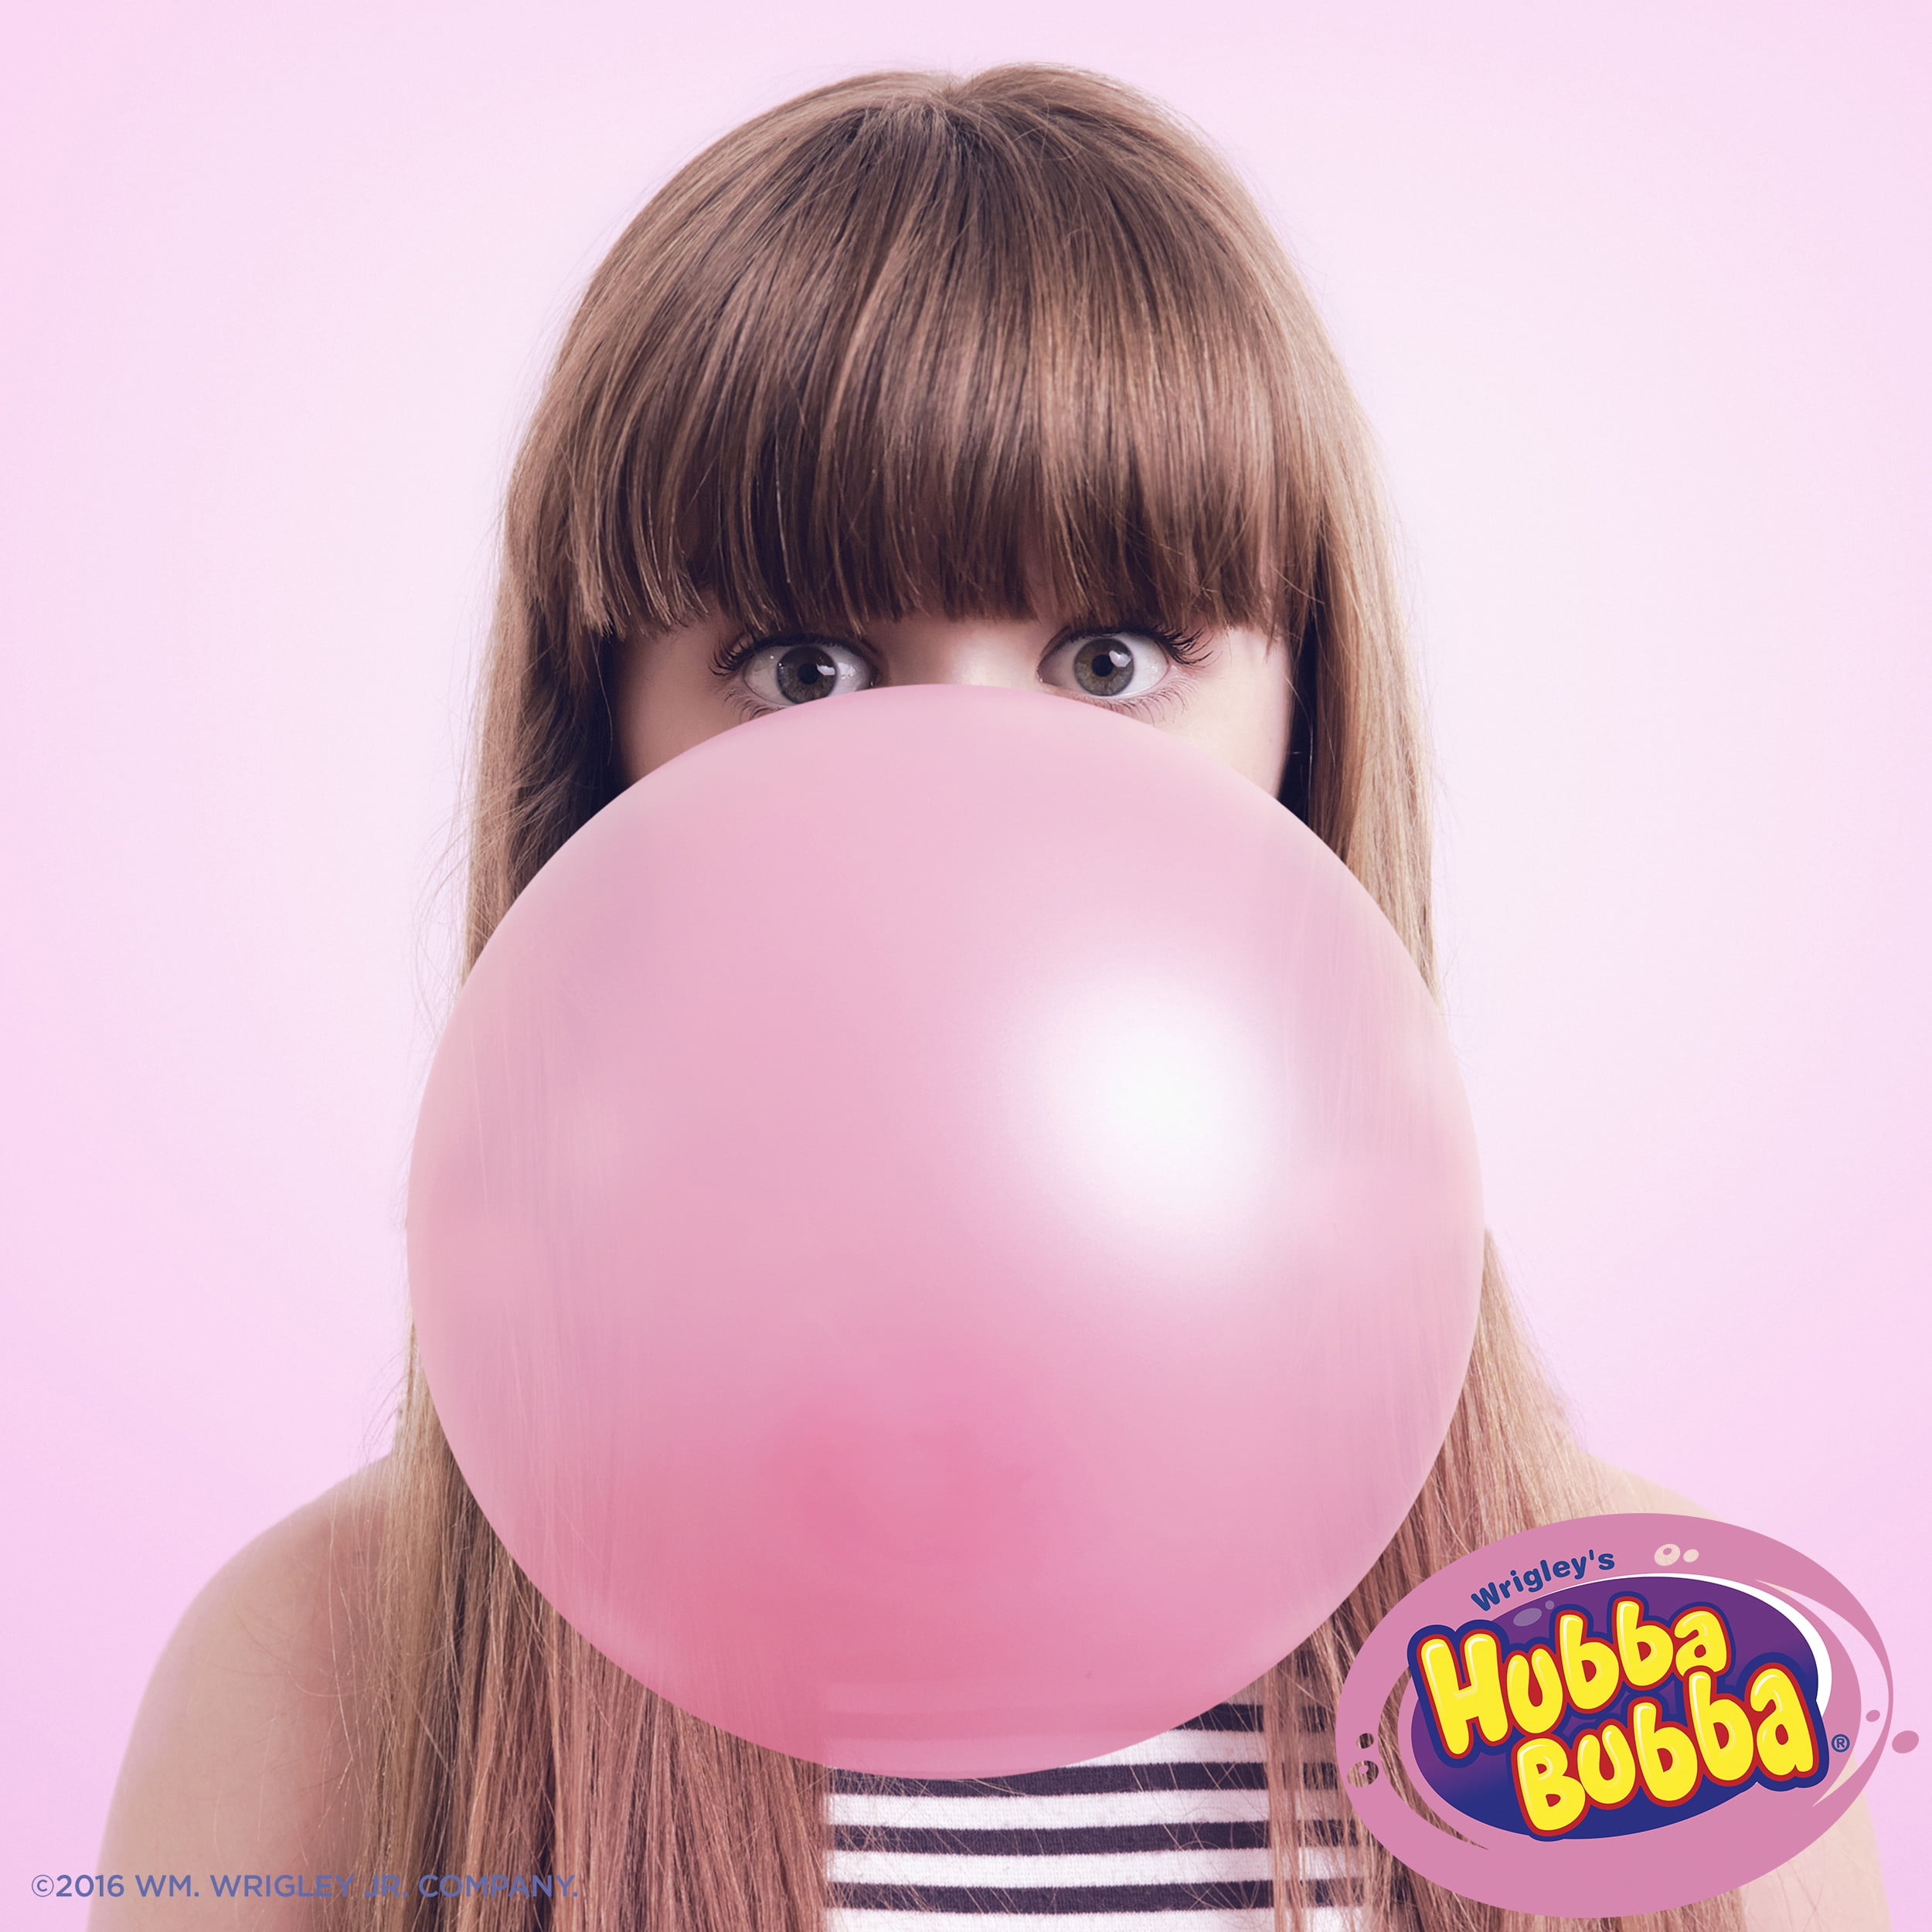 What are the ingredients in Hubba Bubba?